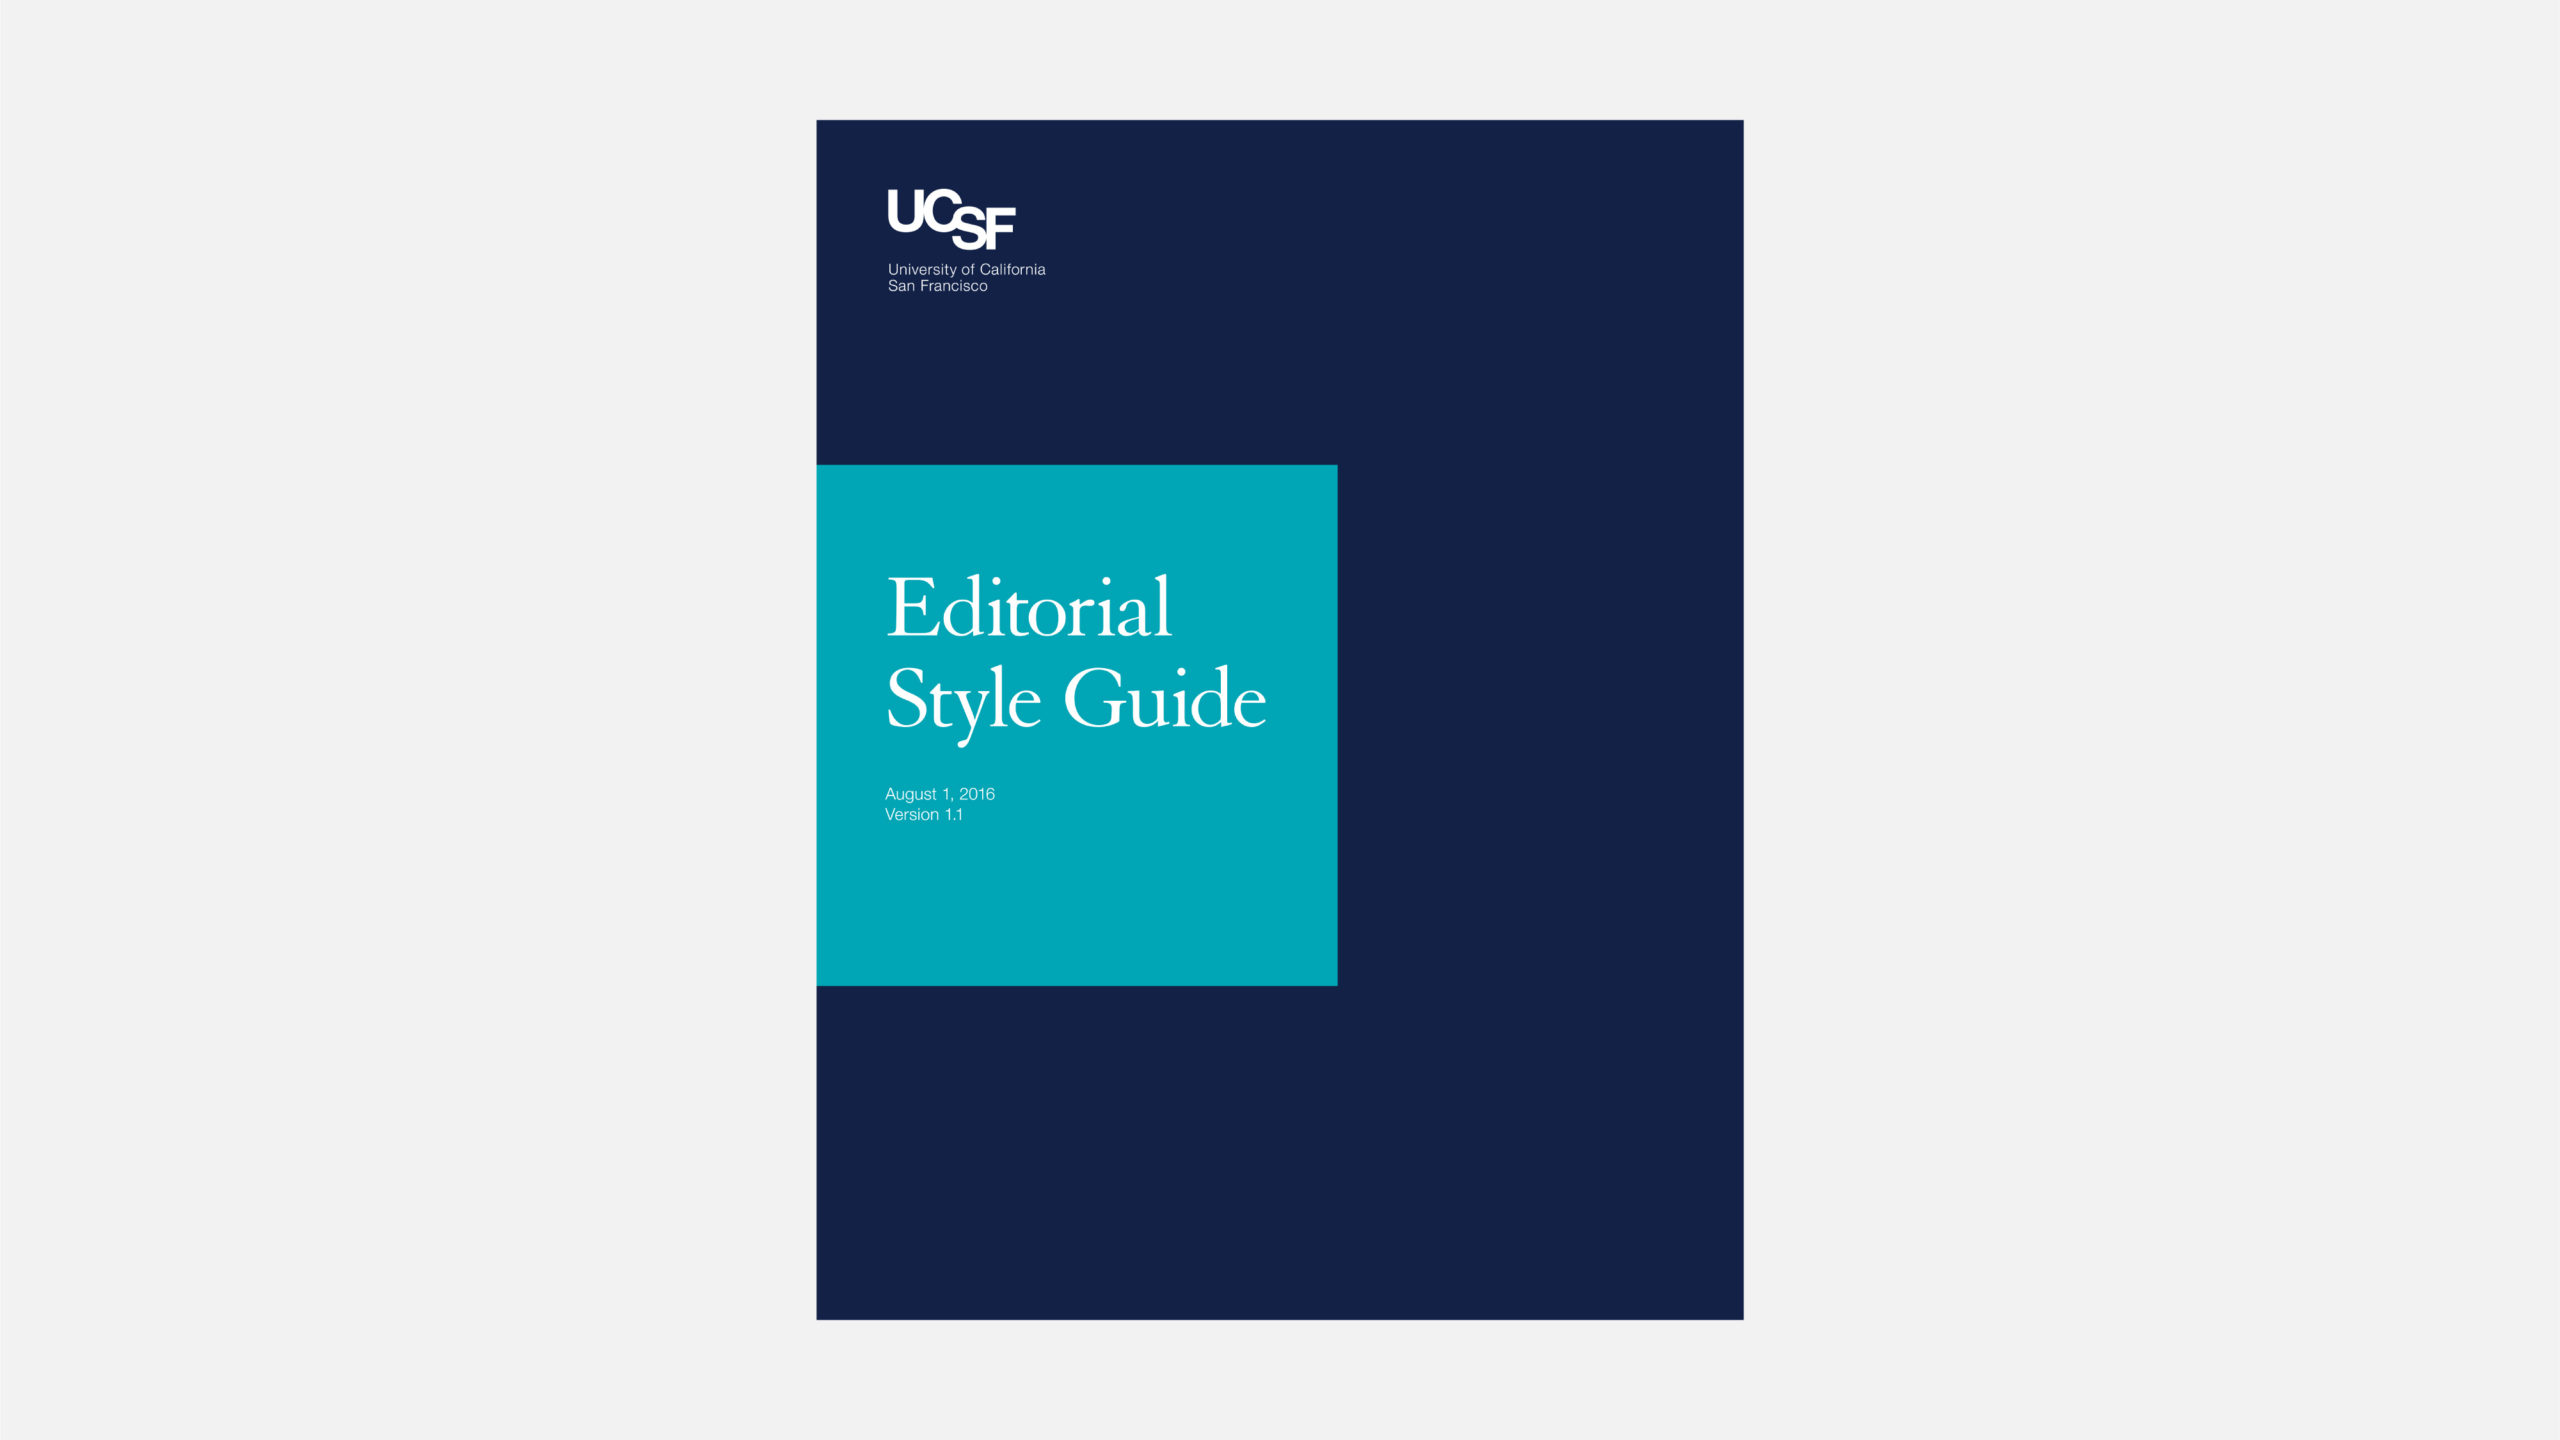 Editorial style guide